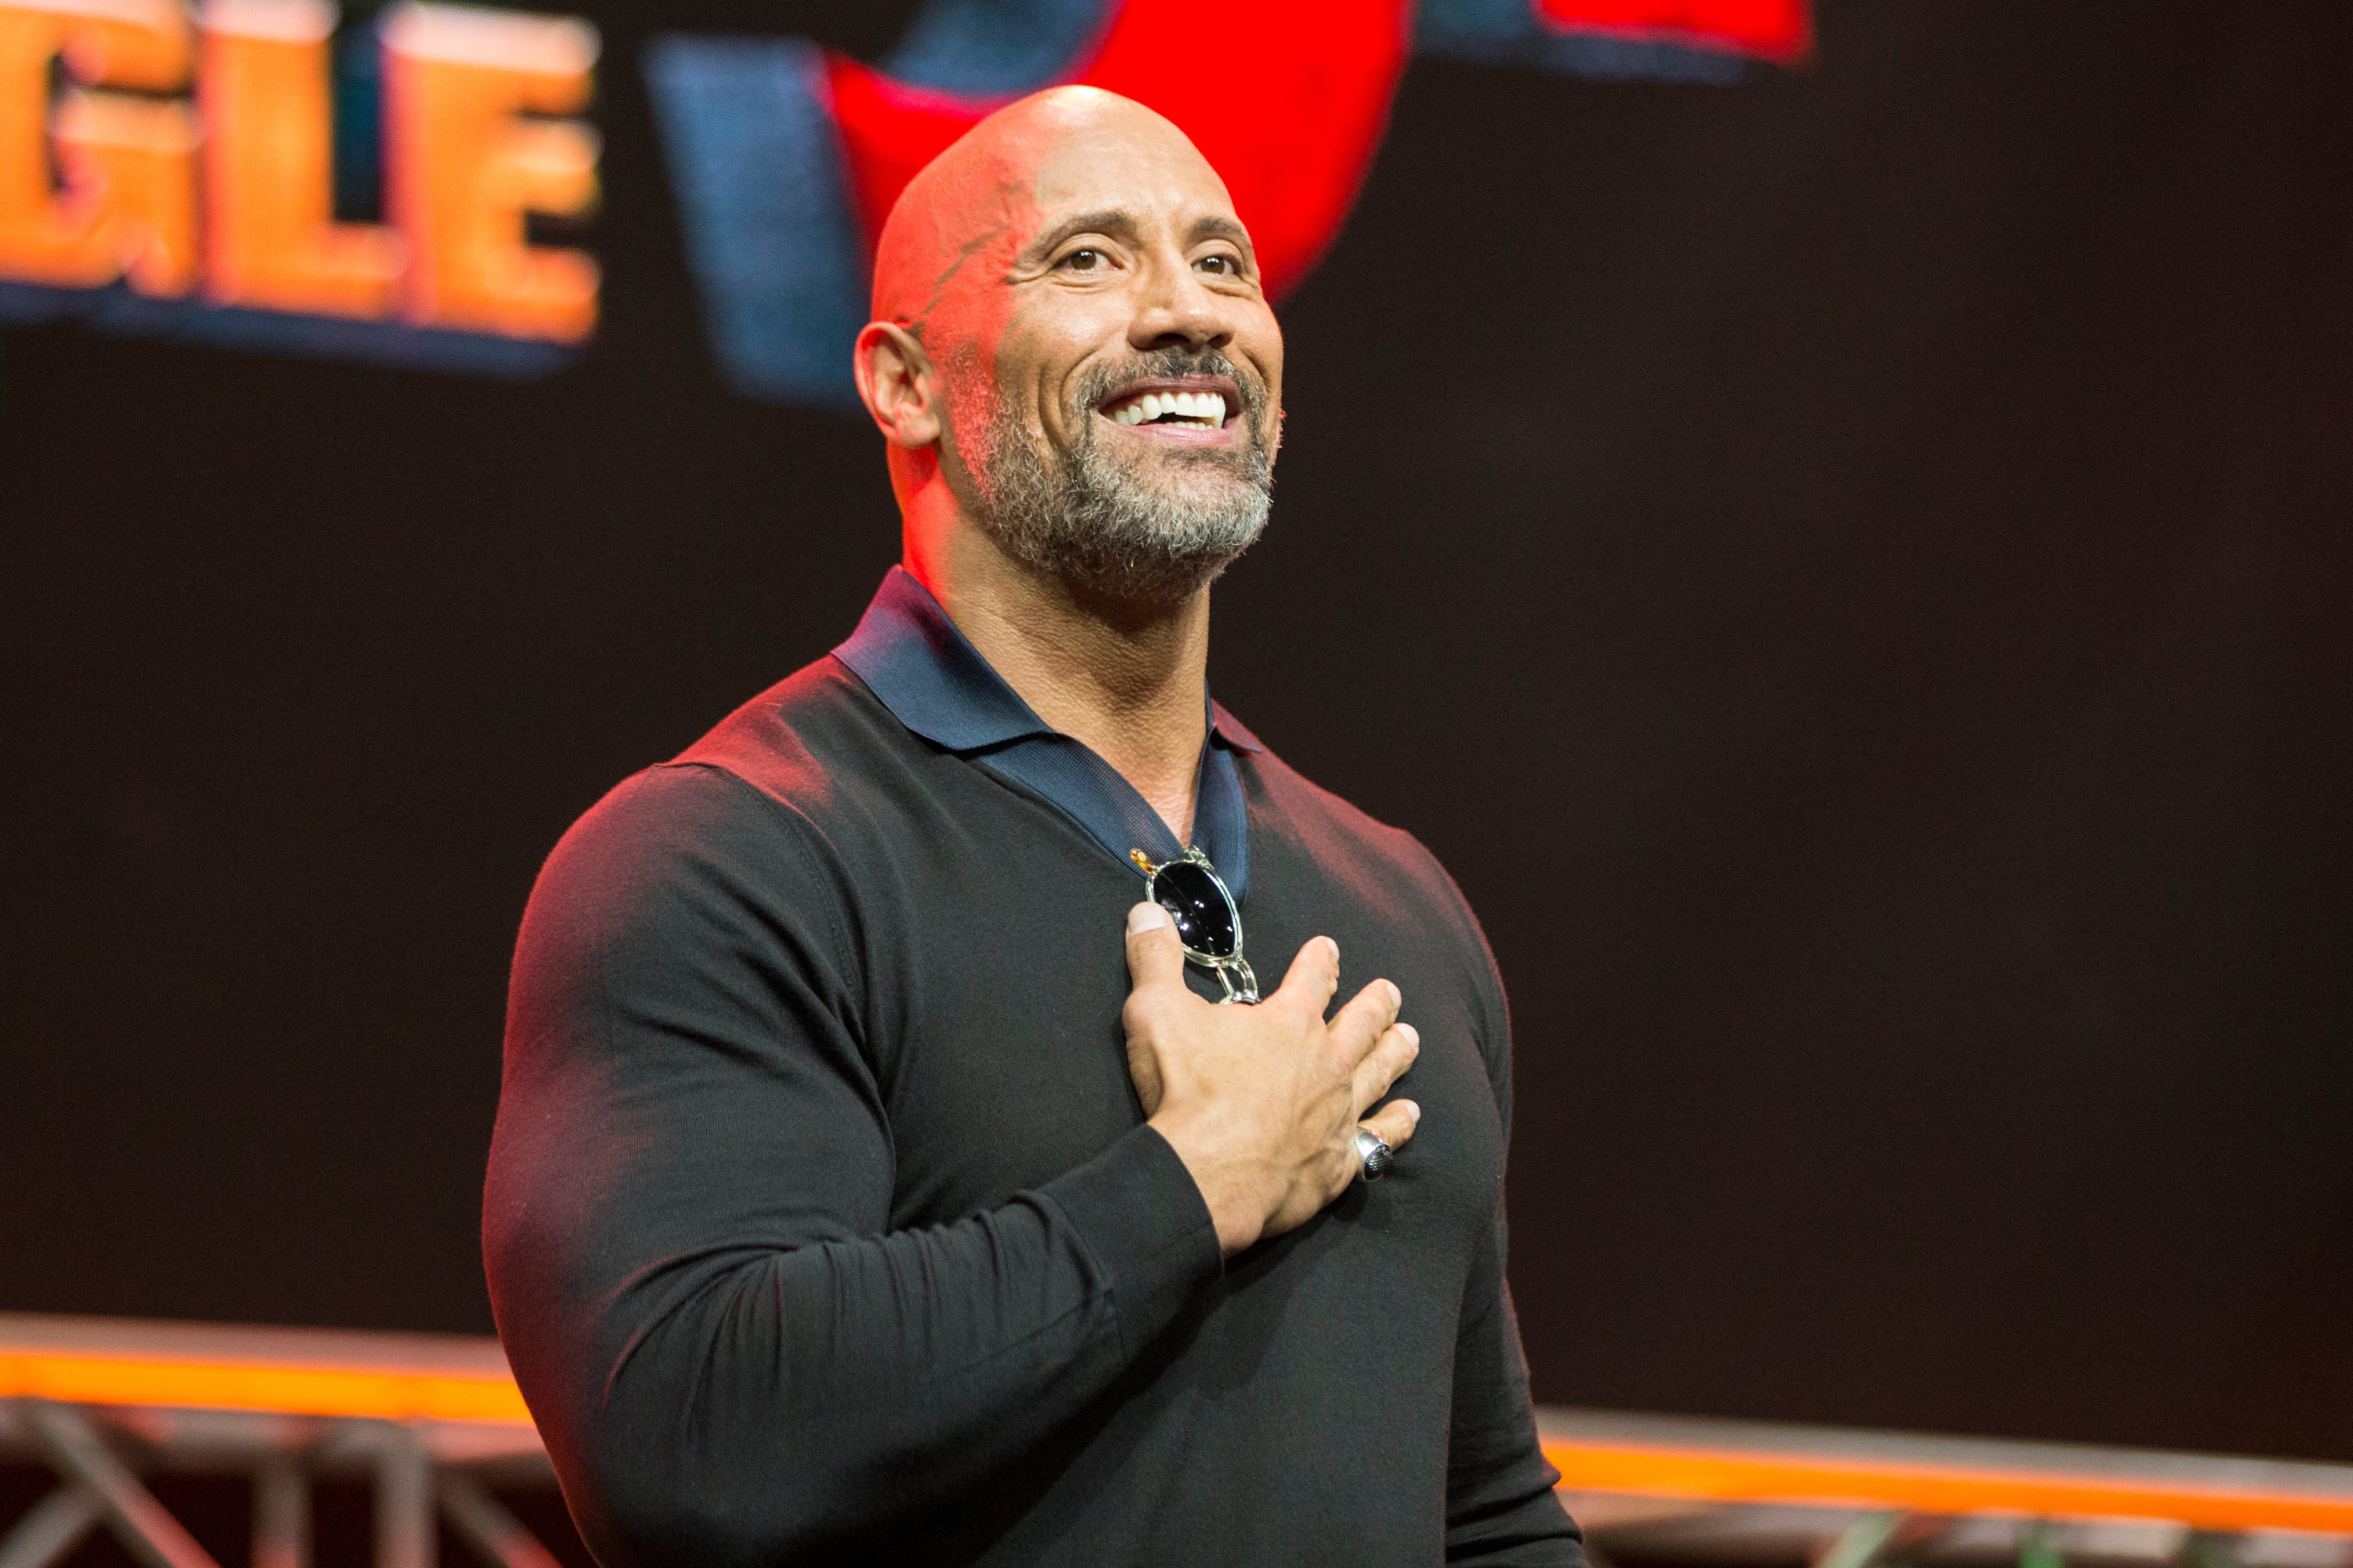 File image: Dwayne Johnson onstage at Entertainment Weekly Presents Dwayne "The Rock" Johnson